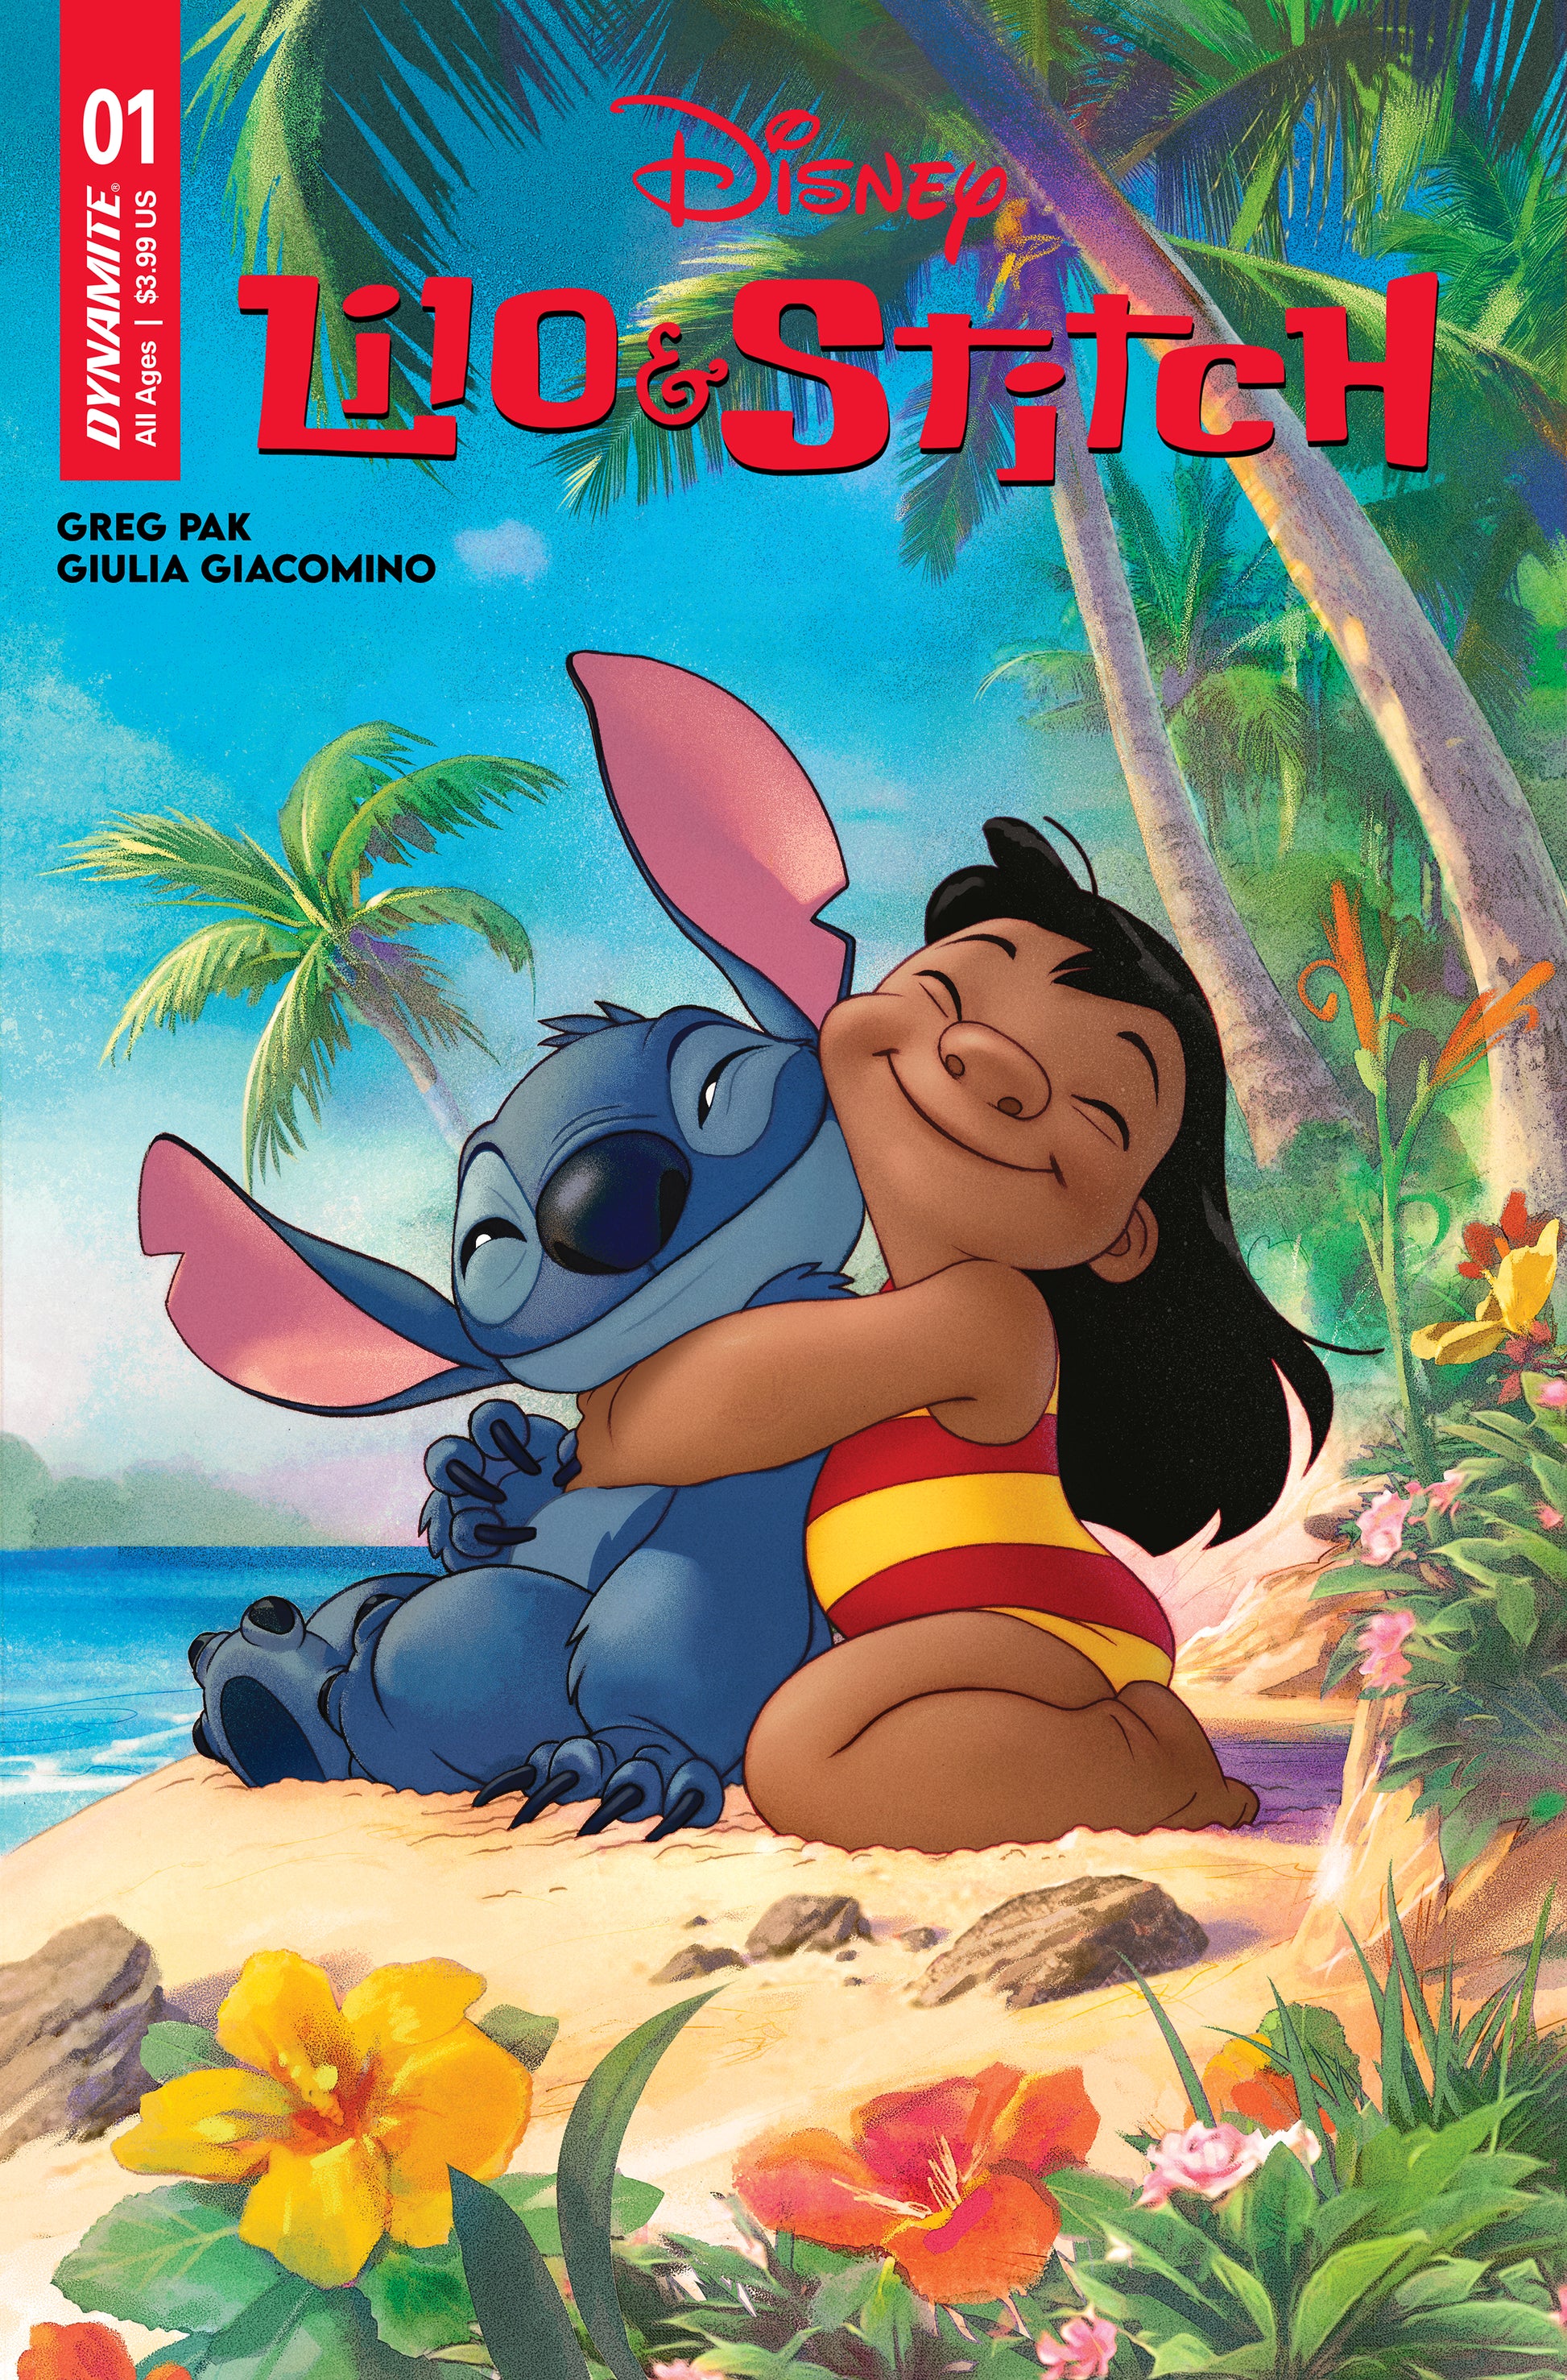 Stitch ! Manga Announced For US Release –